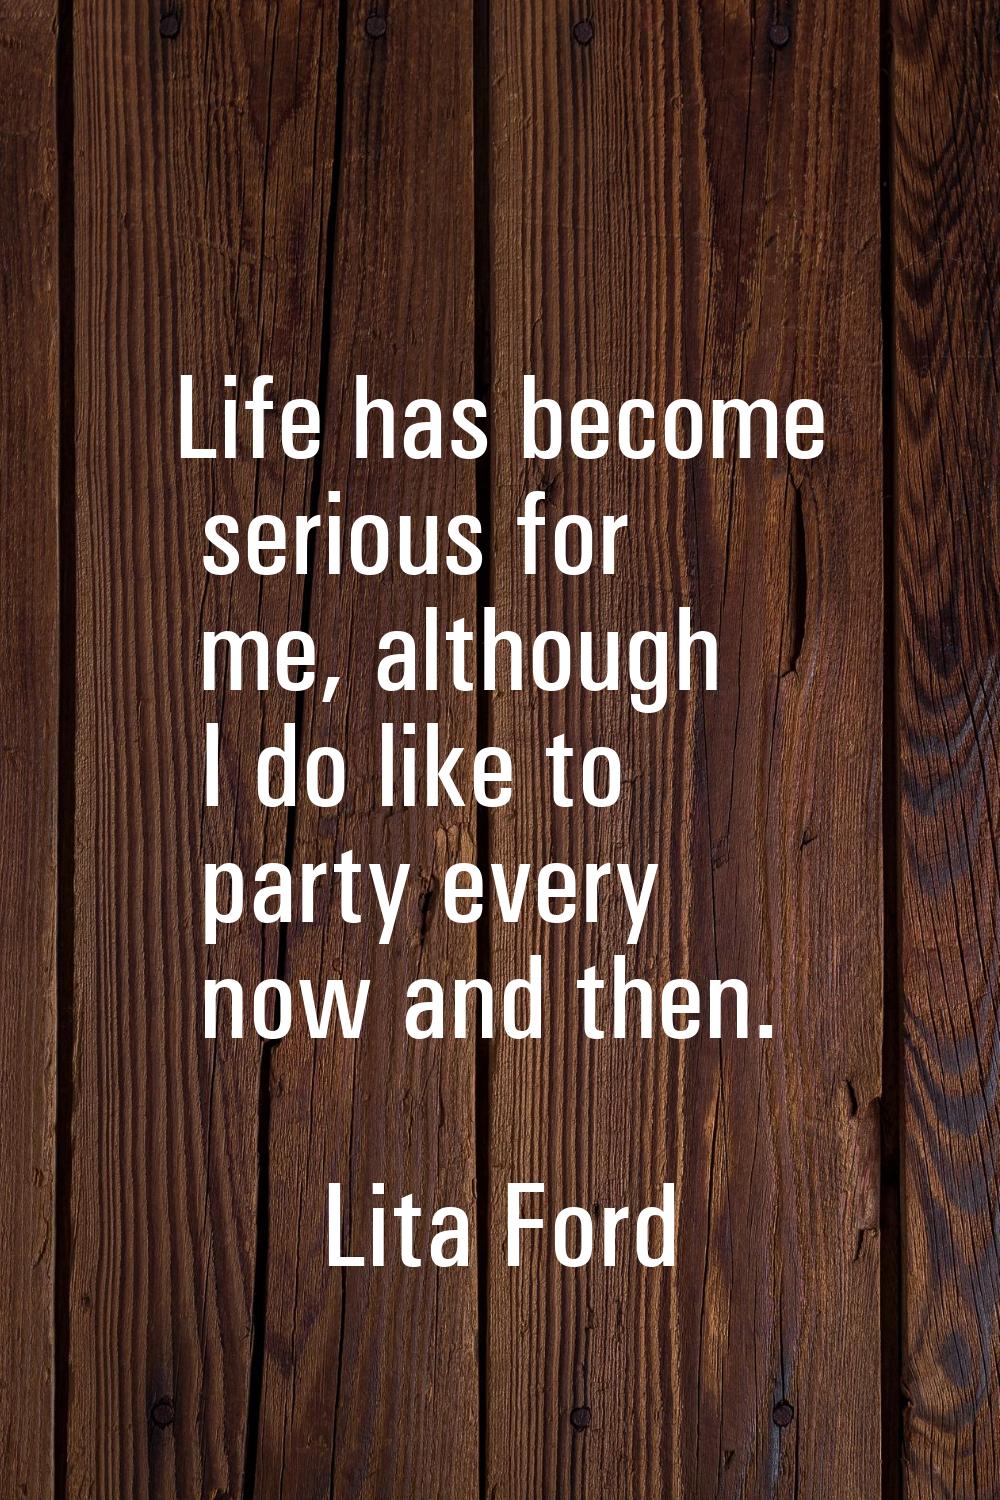 Life has become serious for me, although I do like to party every now and then.